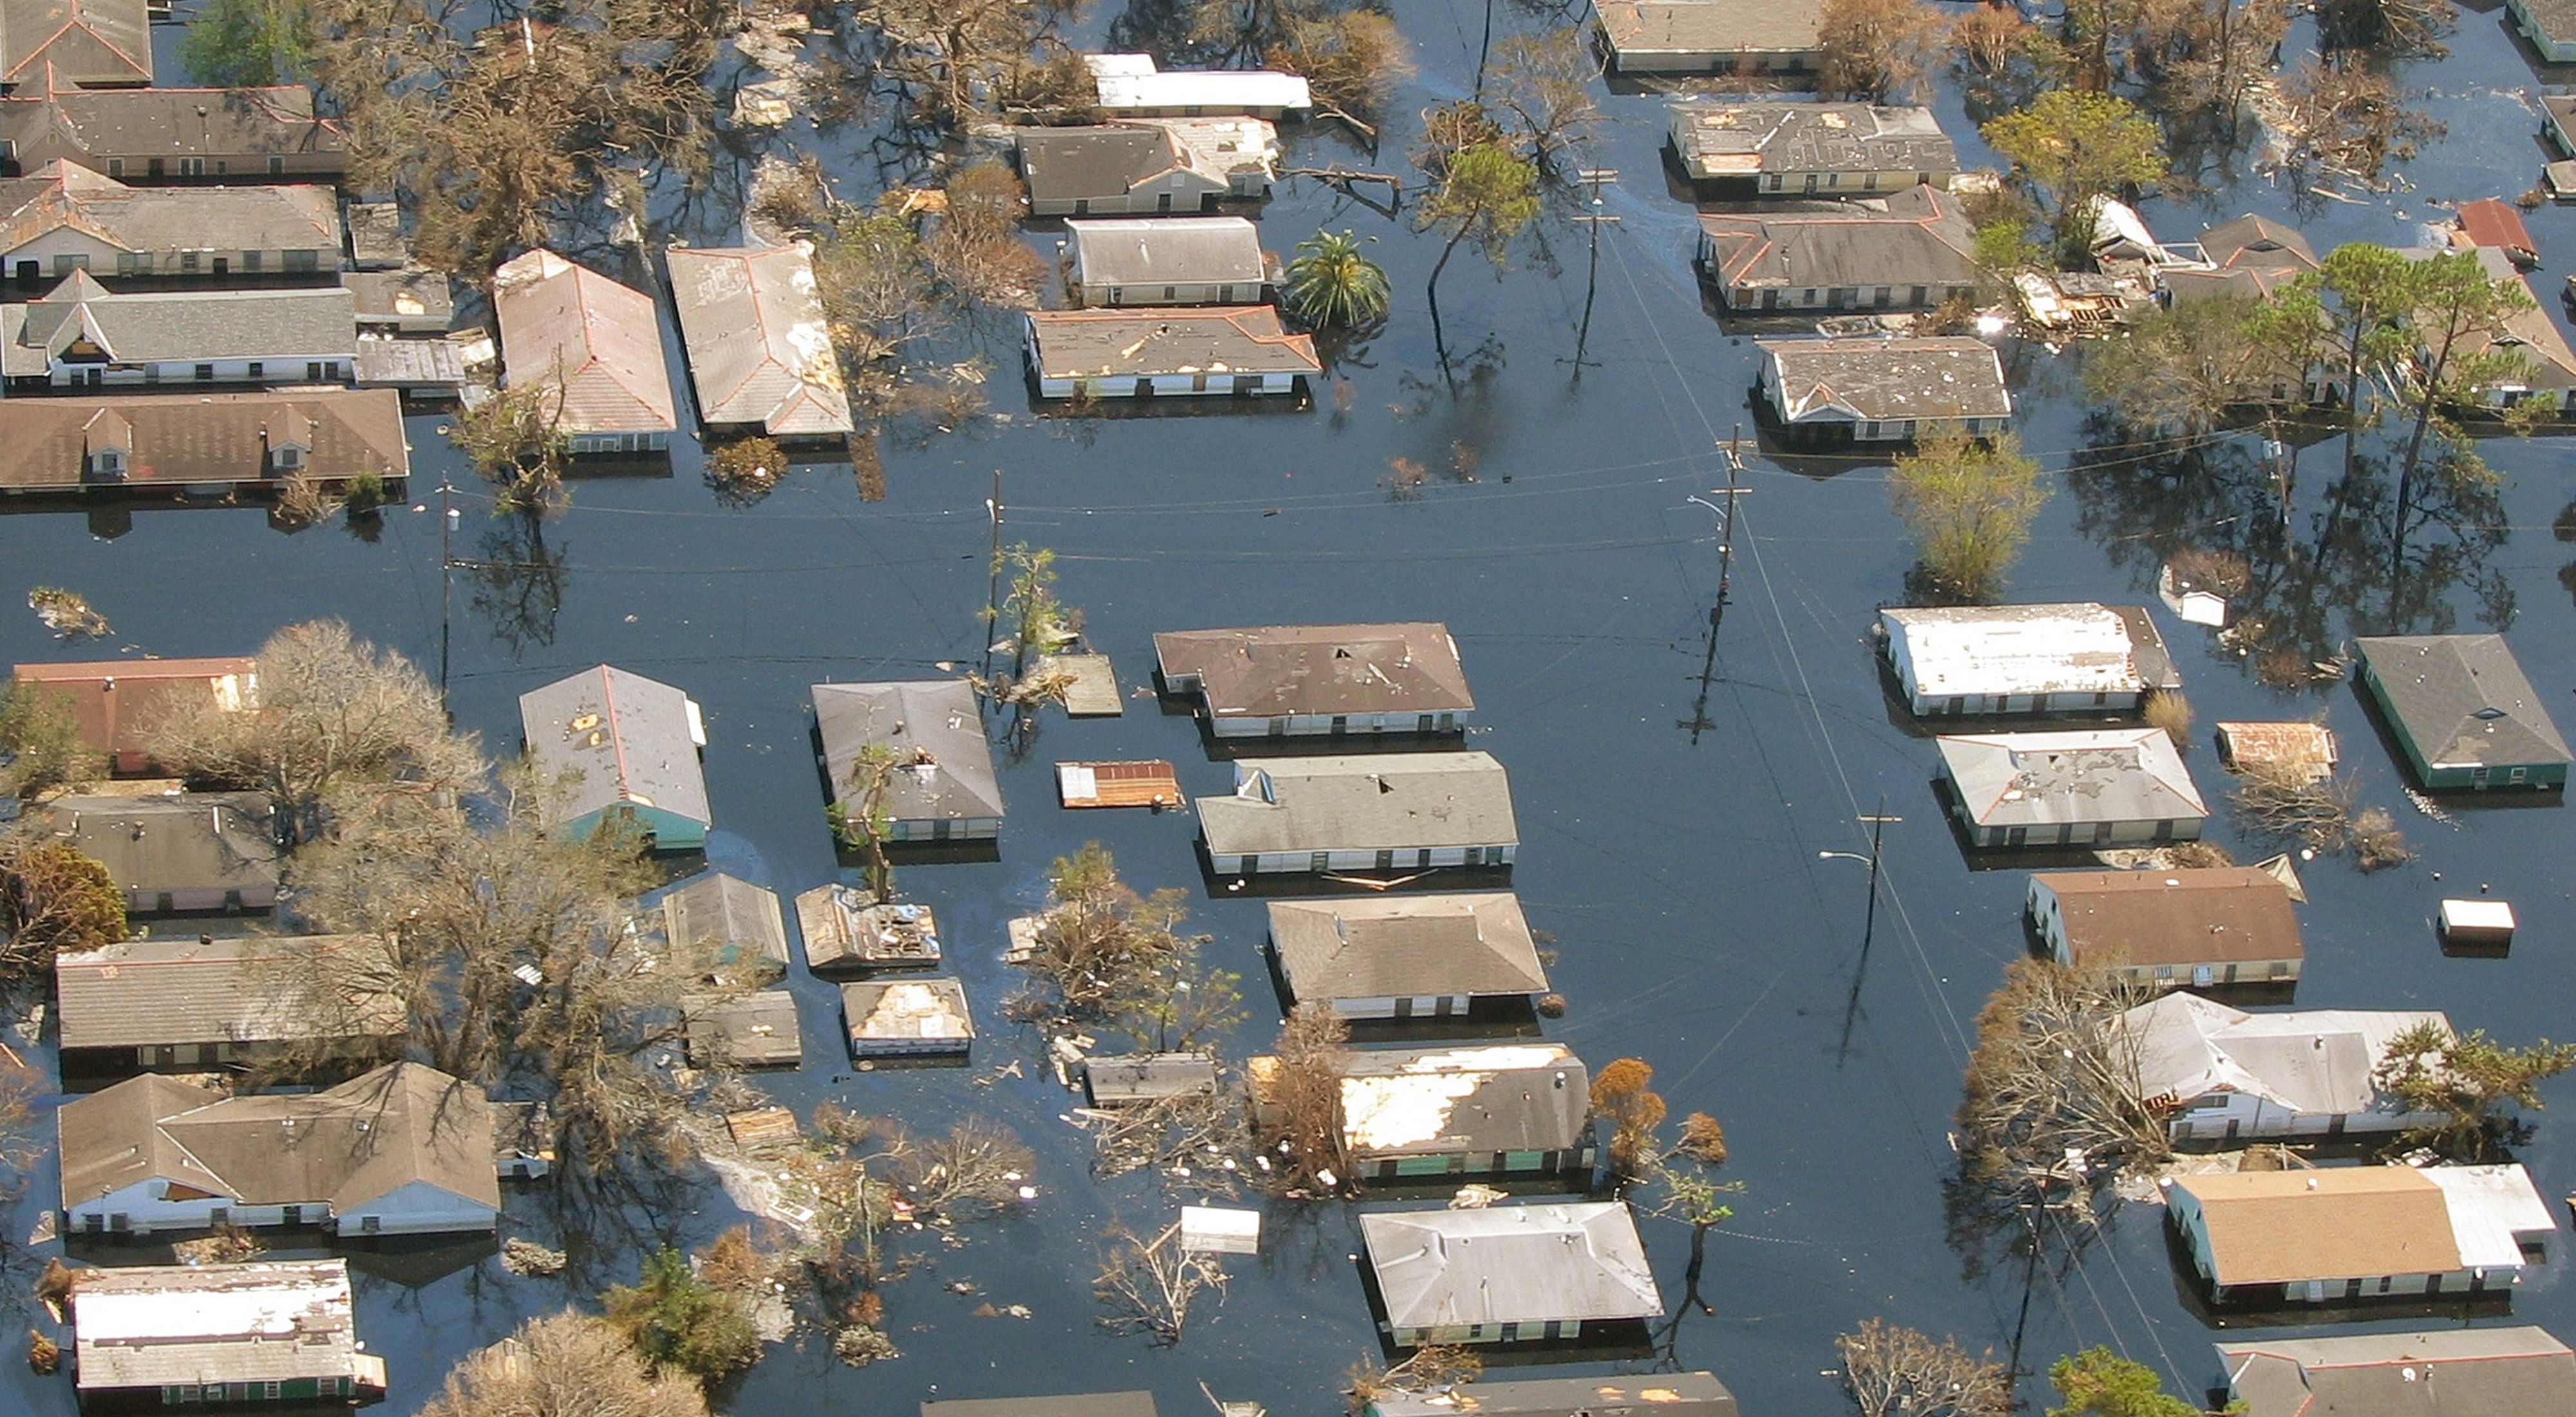 Arial views of flooded homes